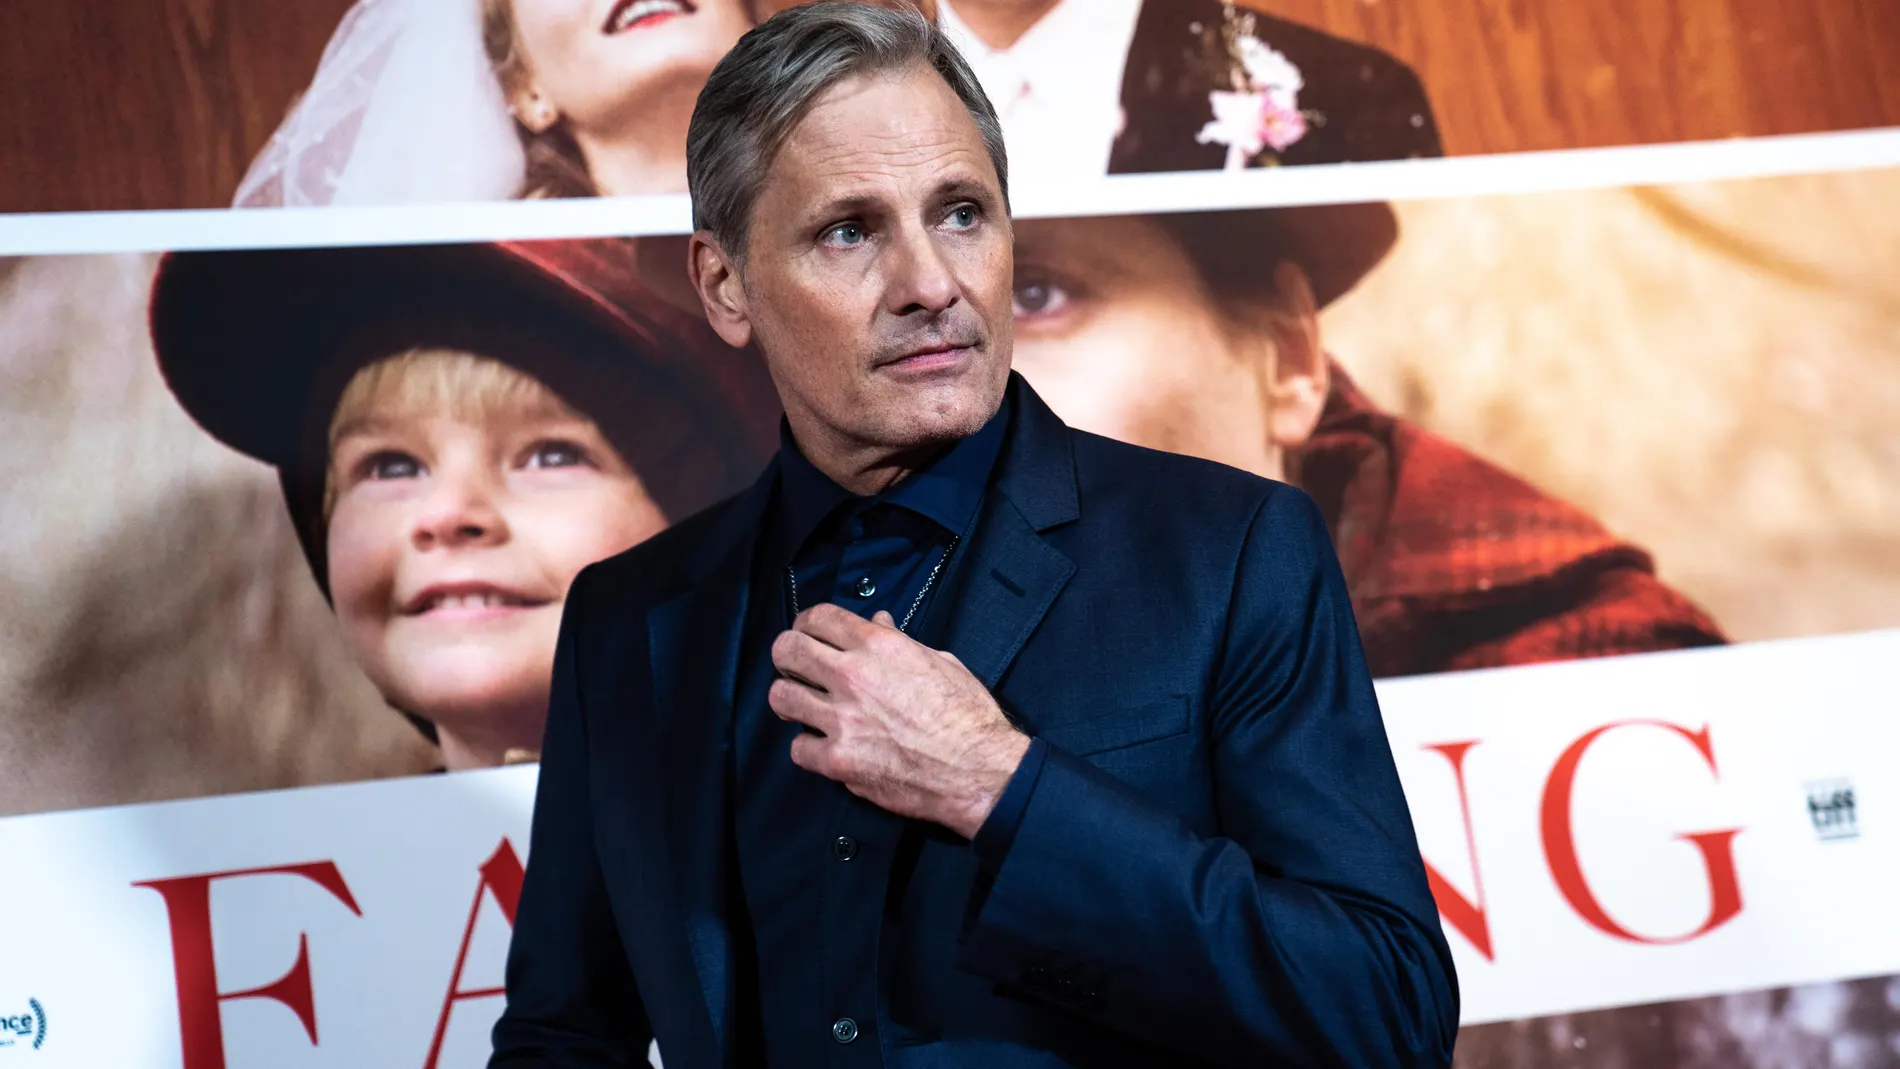 Copenhagen (Denmark), 26/10/2020.- Danish-US actor Viggo Mortensen poses at the premiere of his film 'Falling' in Copenhagen, Denmark, 26 October 2020. The film is Mortensen's debut as director and screenwriter and opens in Danish theaters on 04 November. (Cine, Abierto, Dinamarca, Copenhague) EFE/EPA/Emil Helms DENMARK OUT